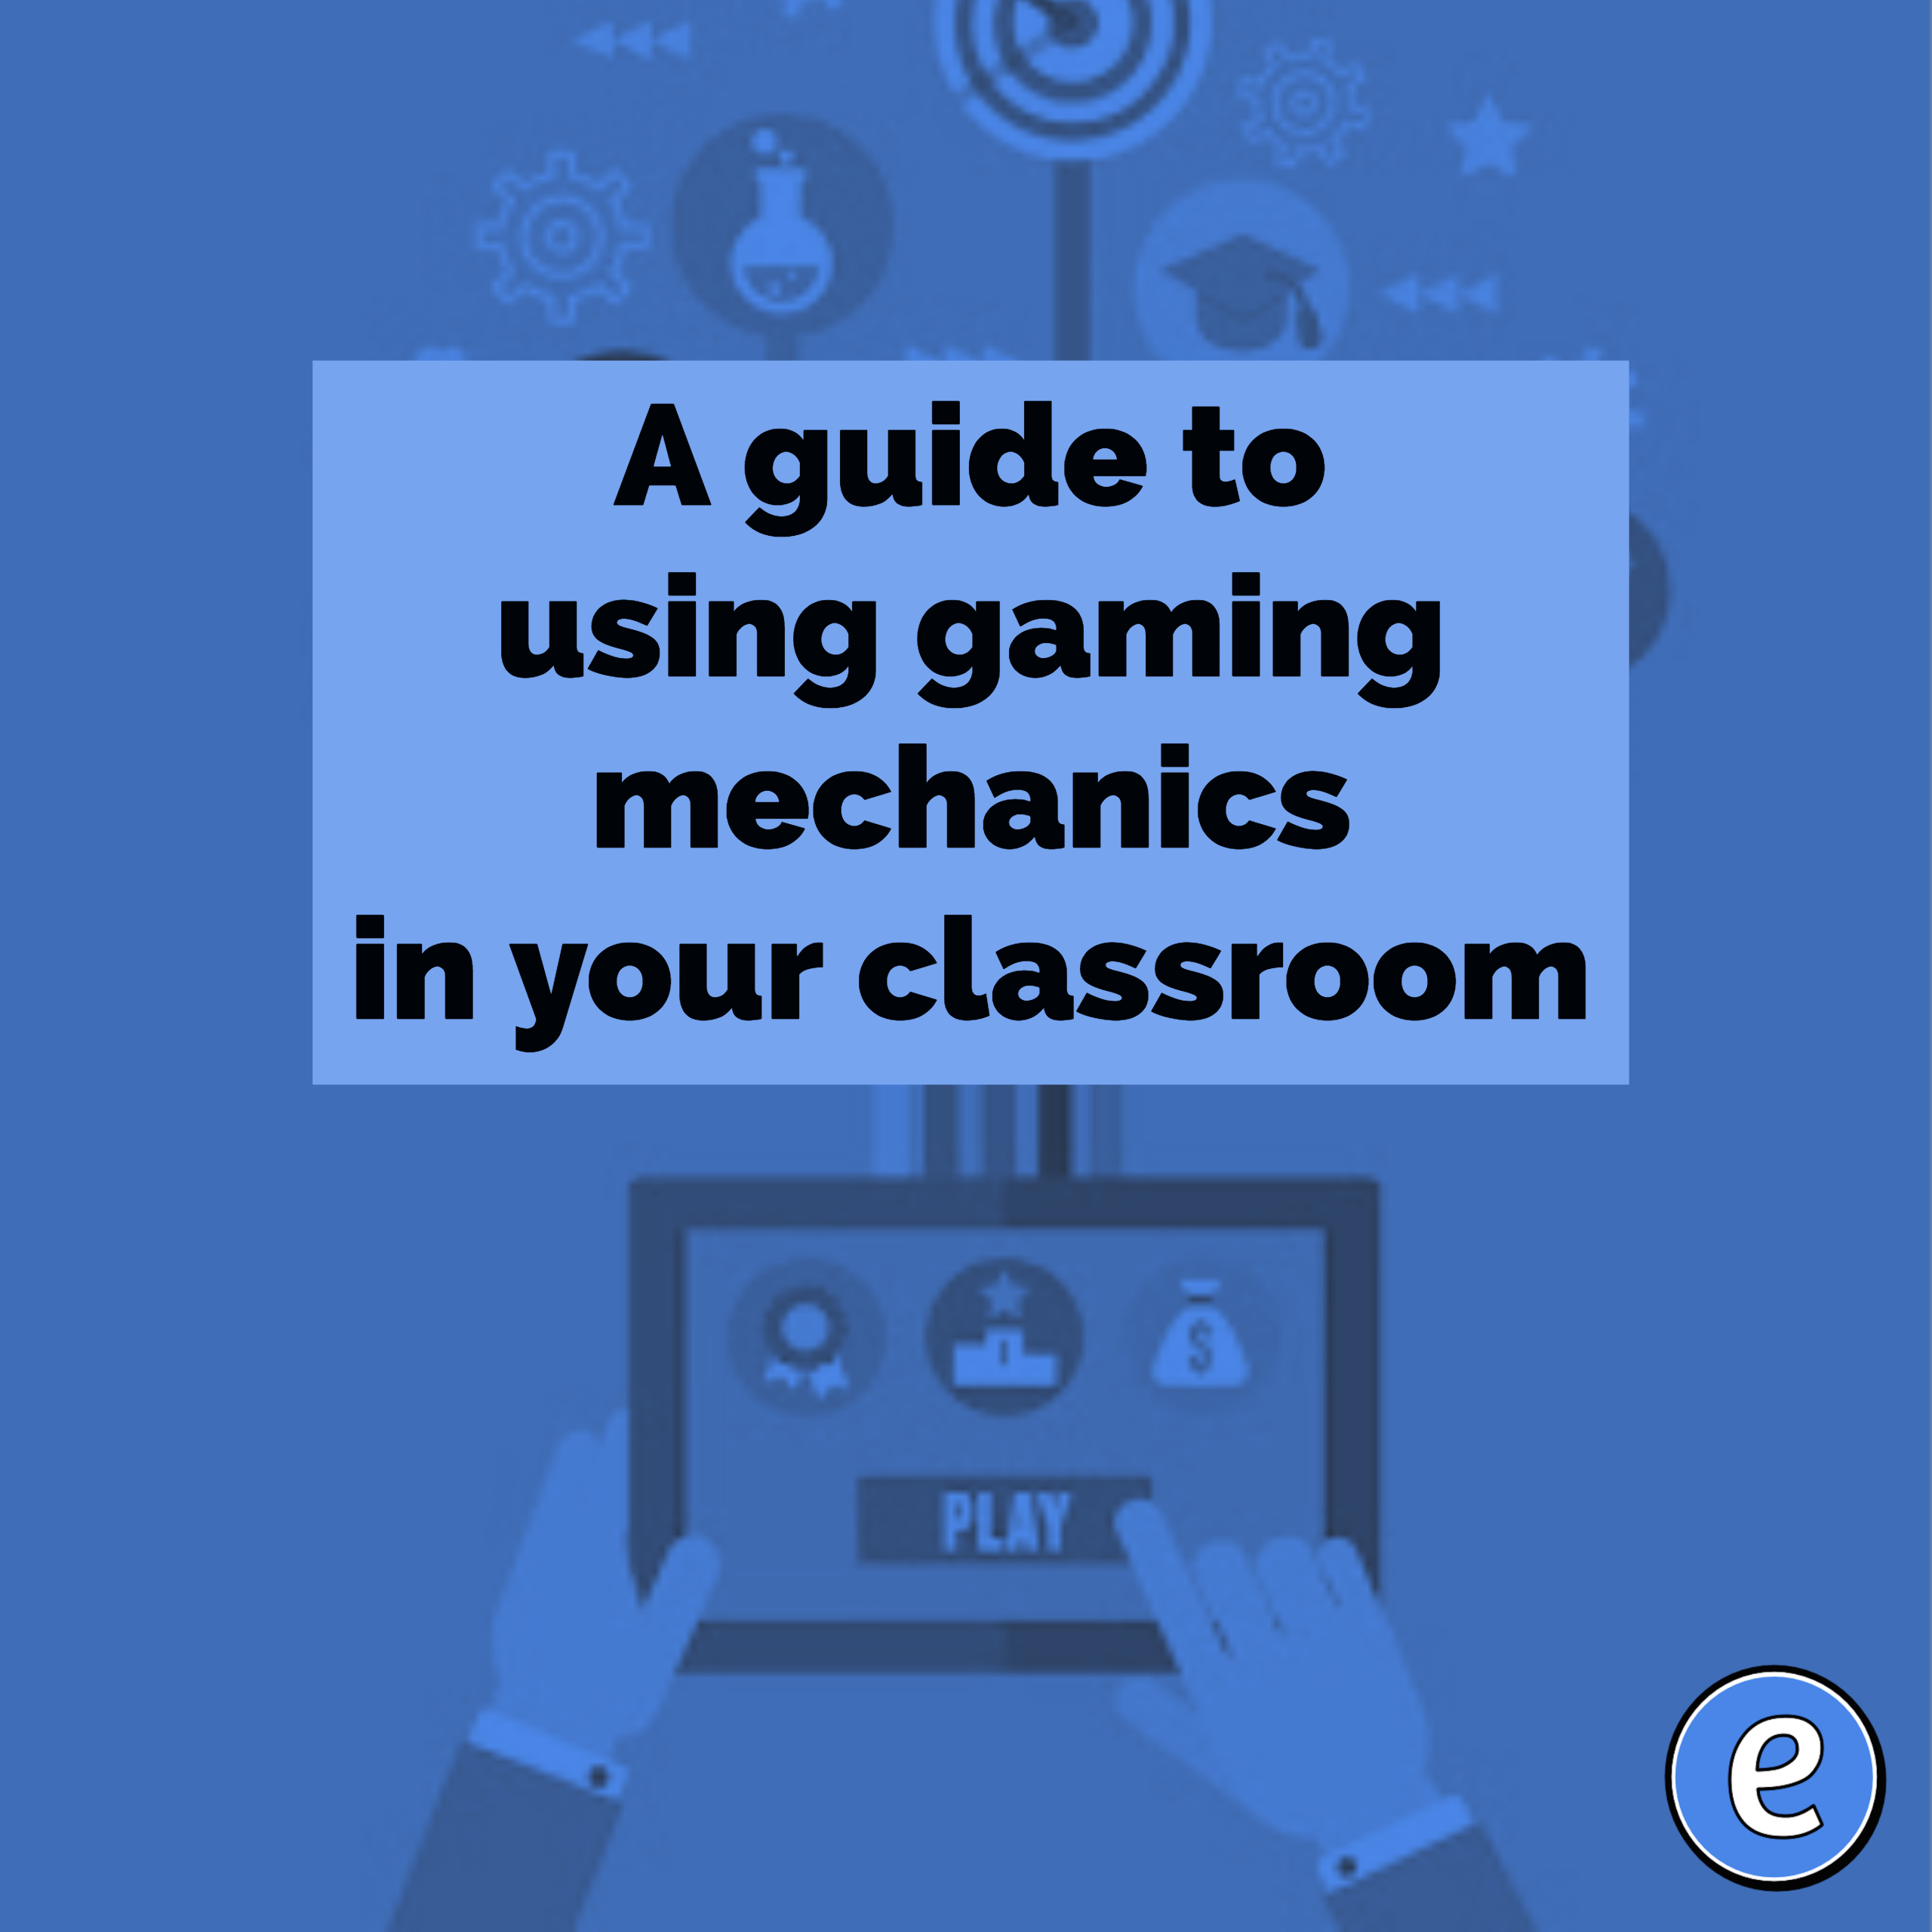 A guide to using gaming mechanics in your classroom